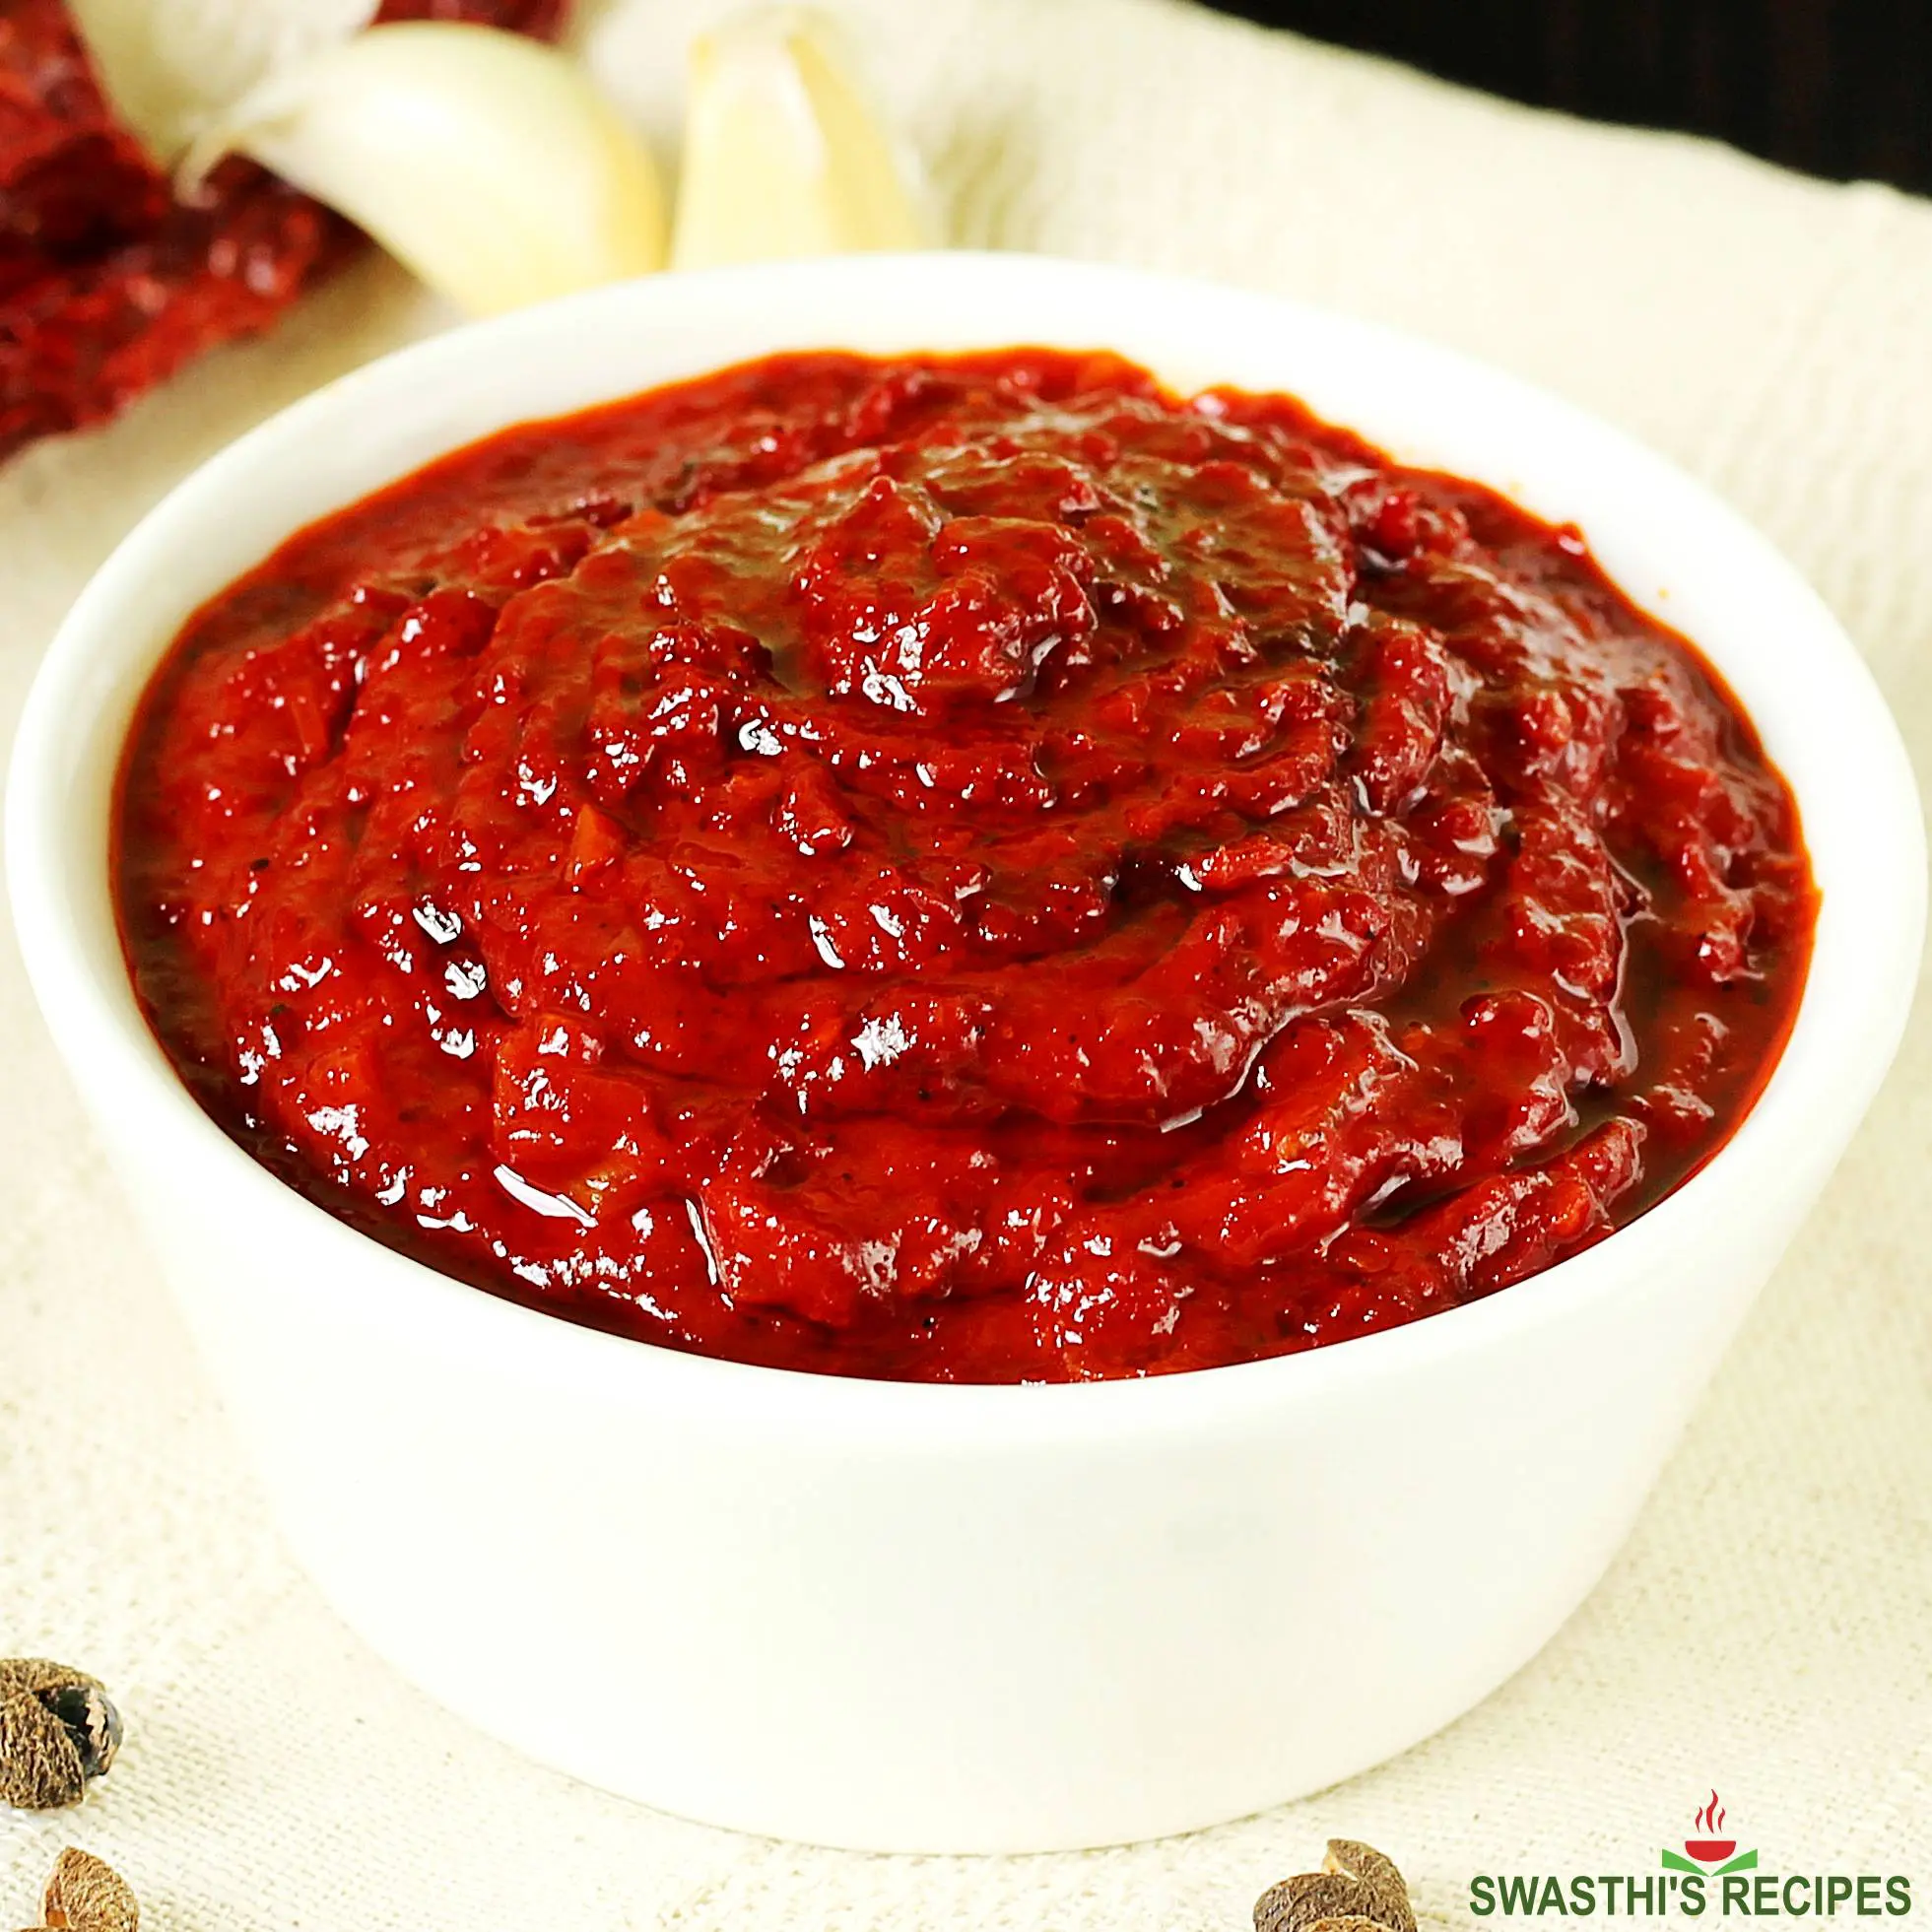 Schezwan Sauce made with red chilies, soya sauce and pepper